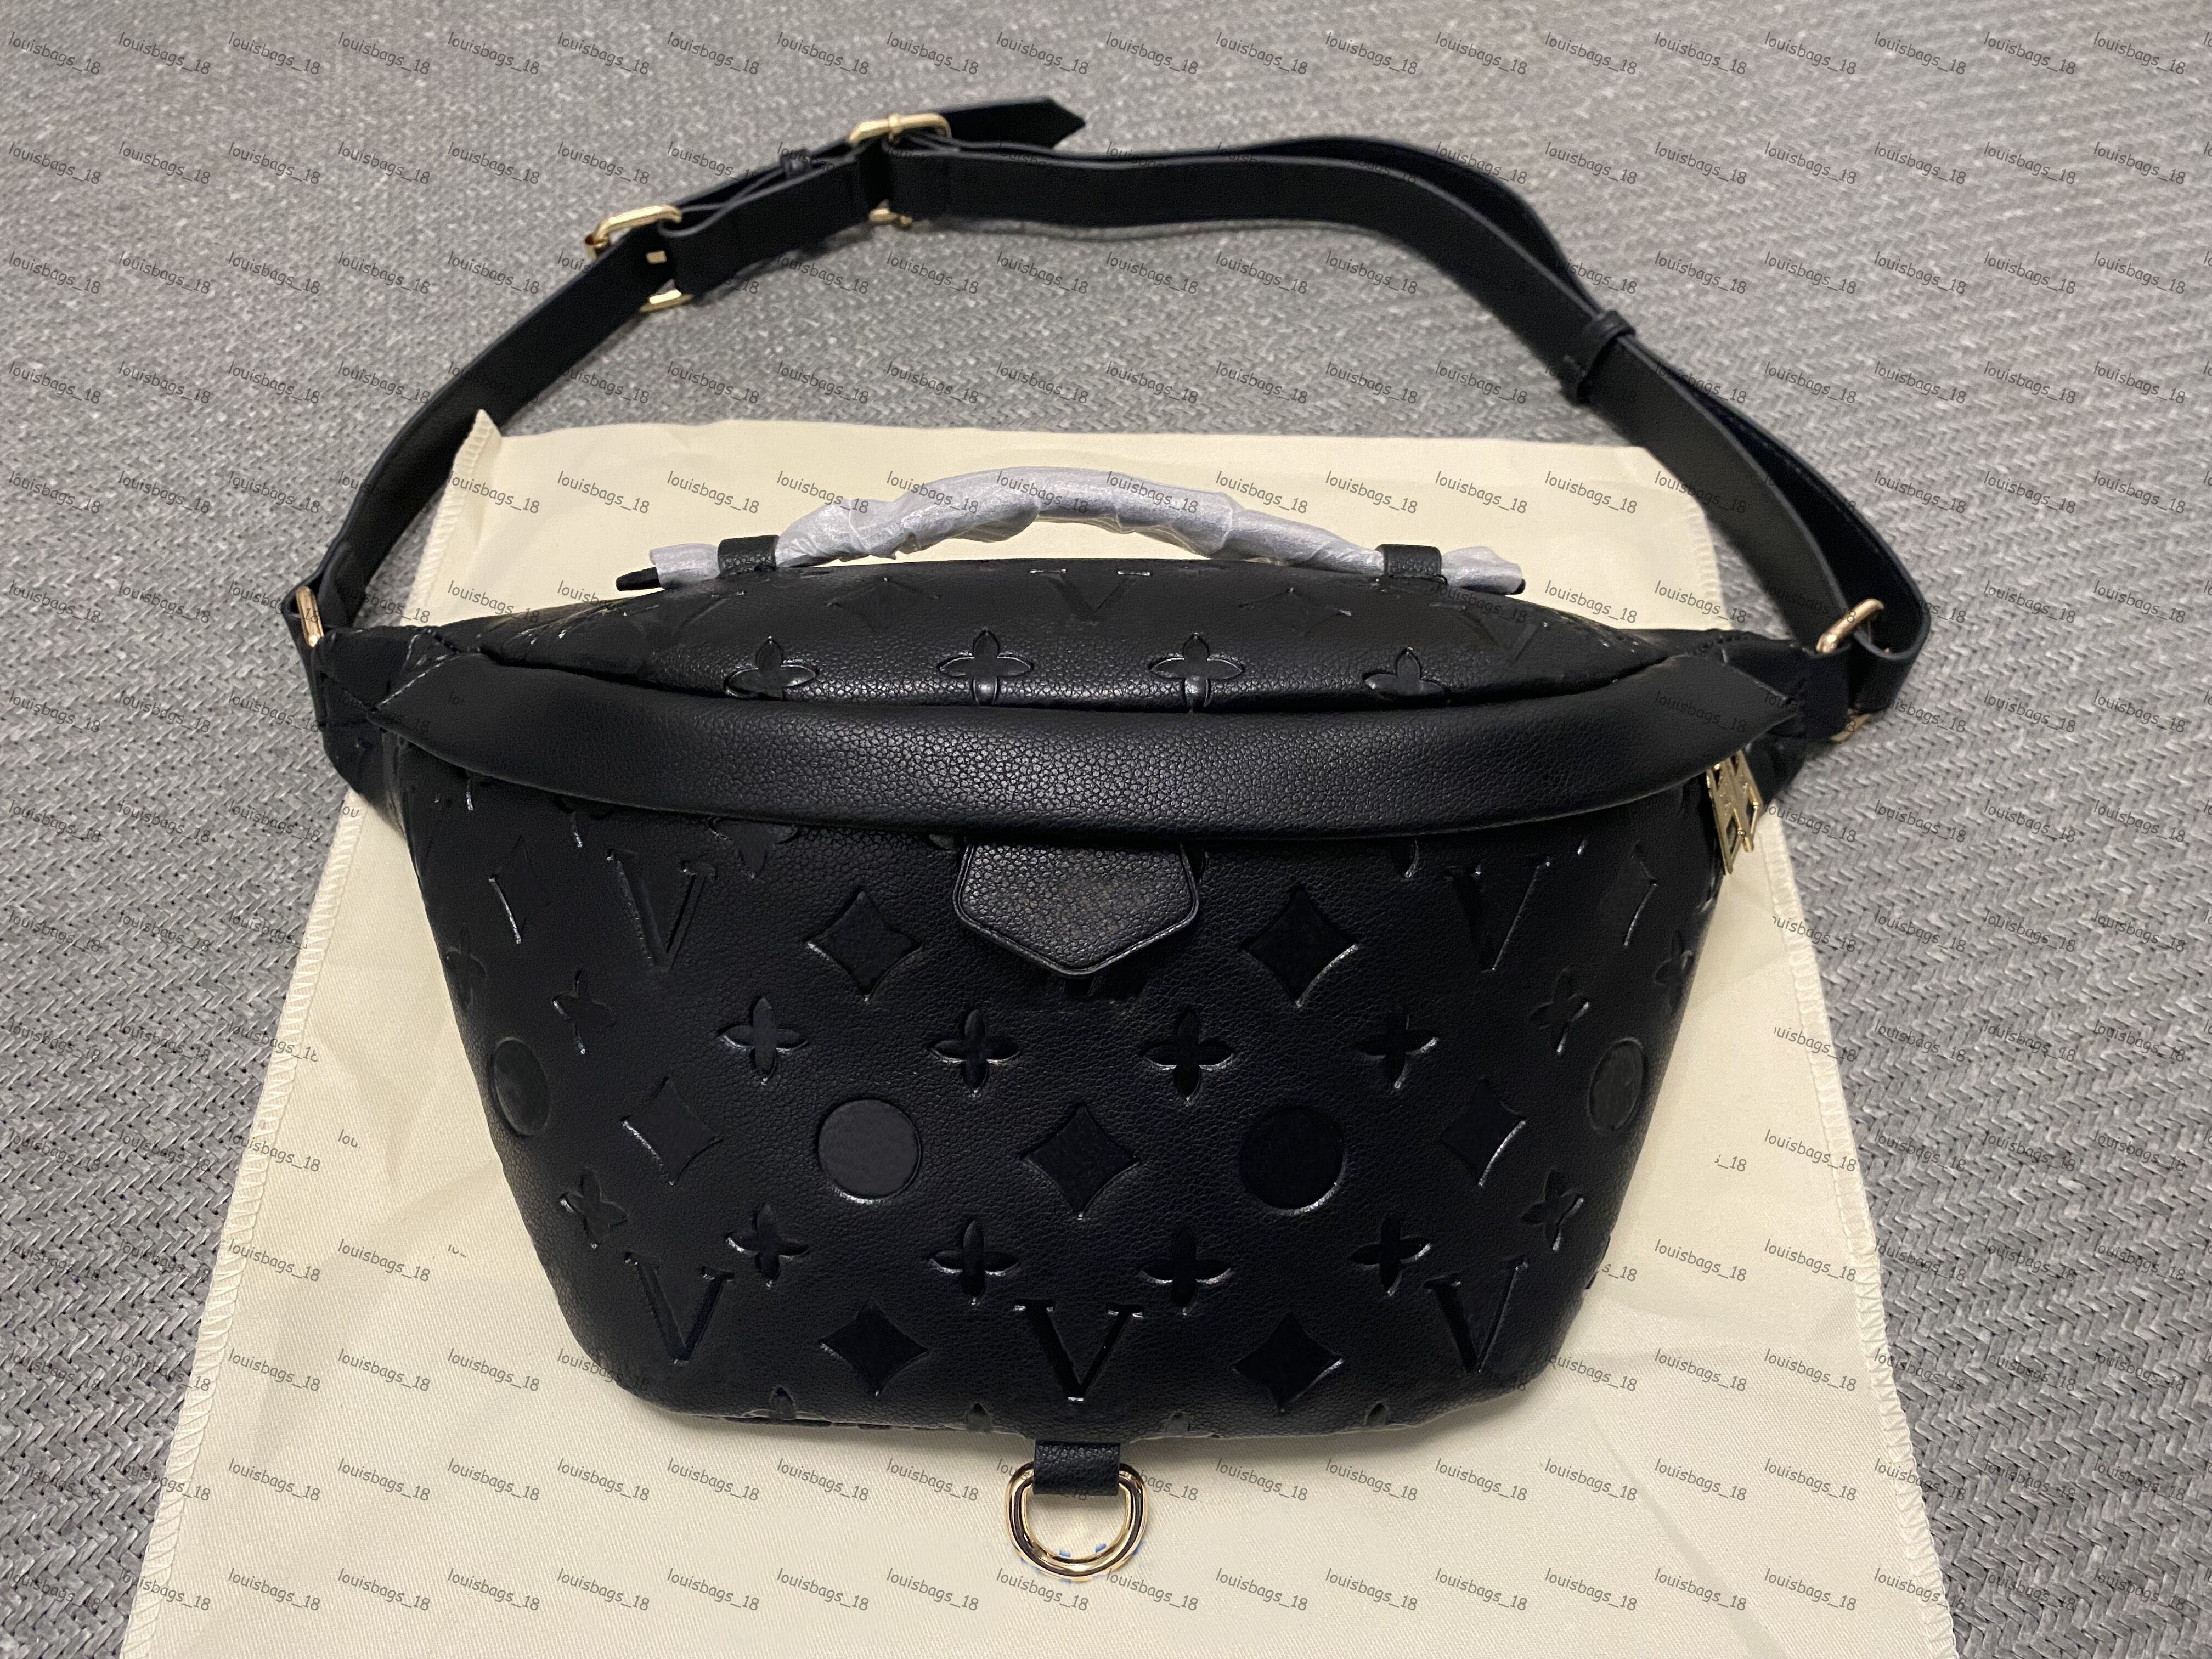 

Bumbag Cross Body Waist Bags louiseity Temperament Bumbags Fanny Pack Bum embossing flowers soft leather Luxurys viutonity bags Serial Number Date Code DustBag, Embossed black